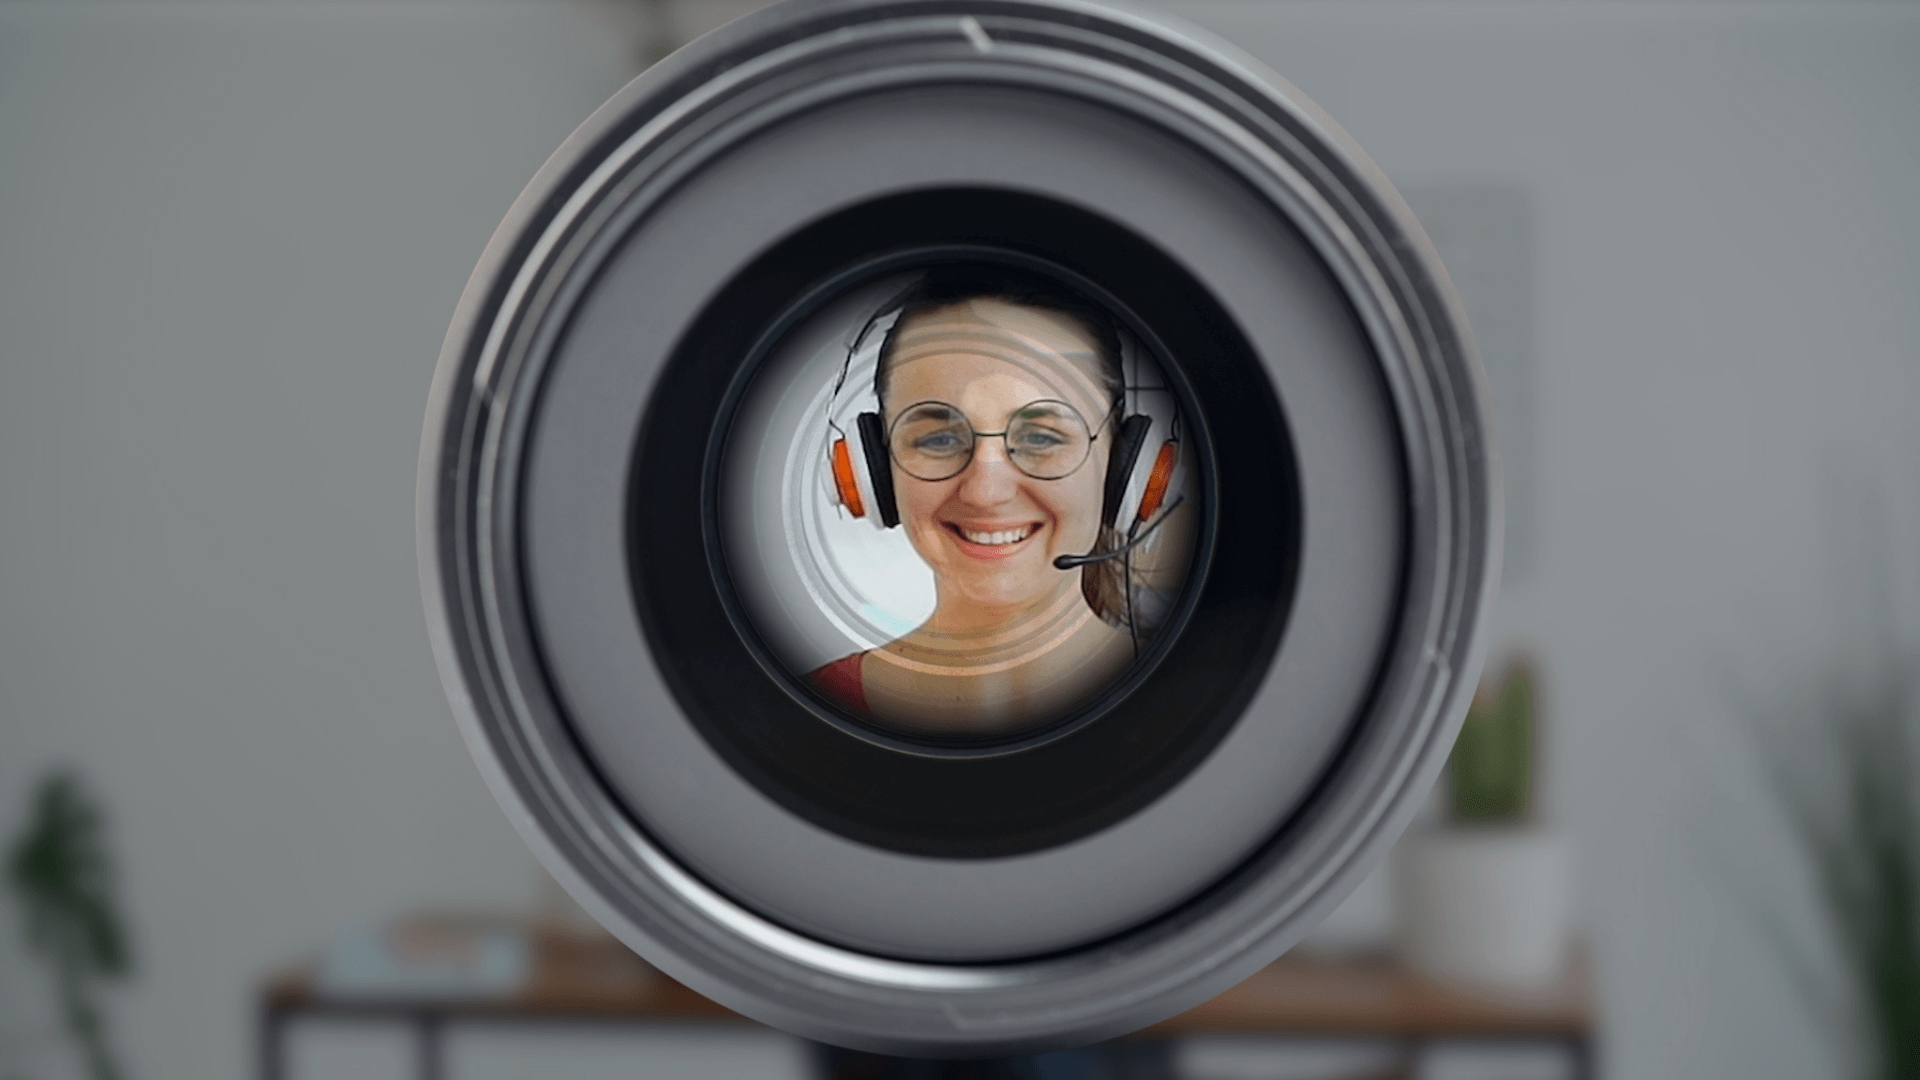 An image of a woman with headphones in front of a camera to Improve video call quality